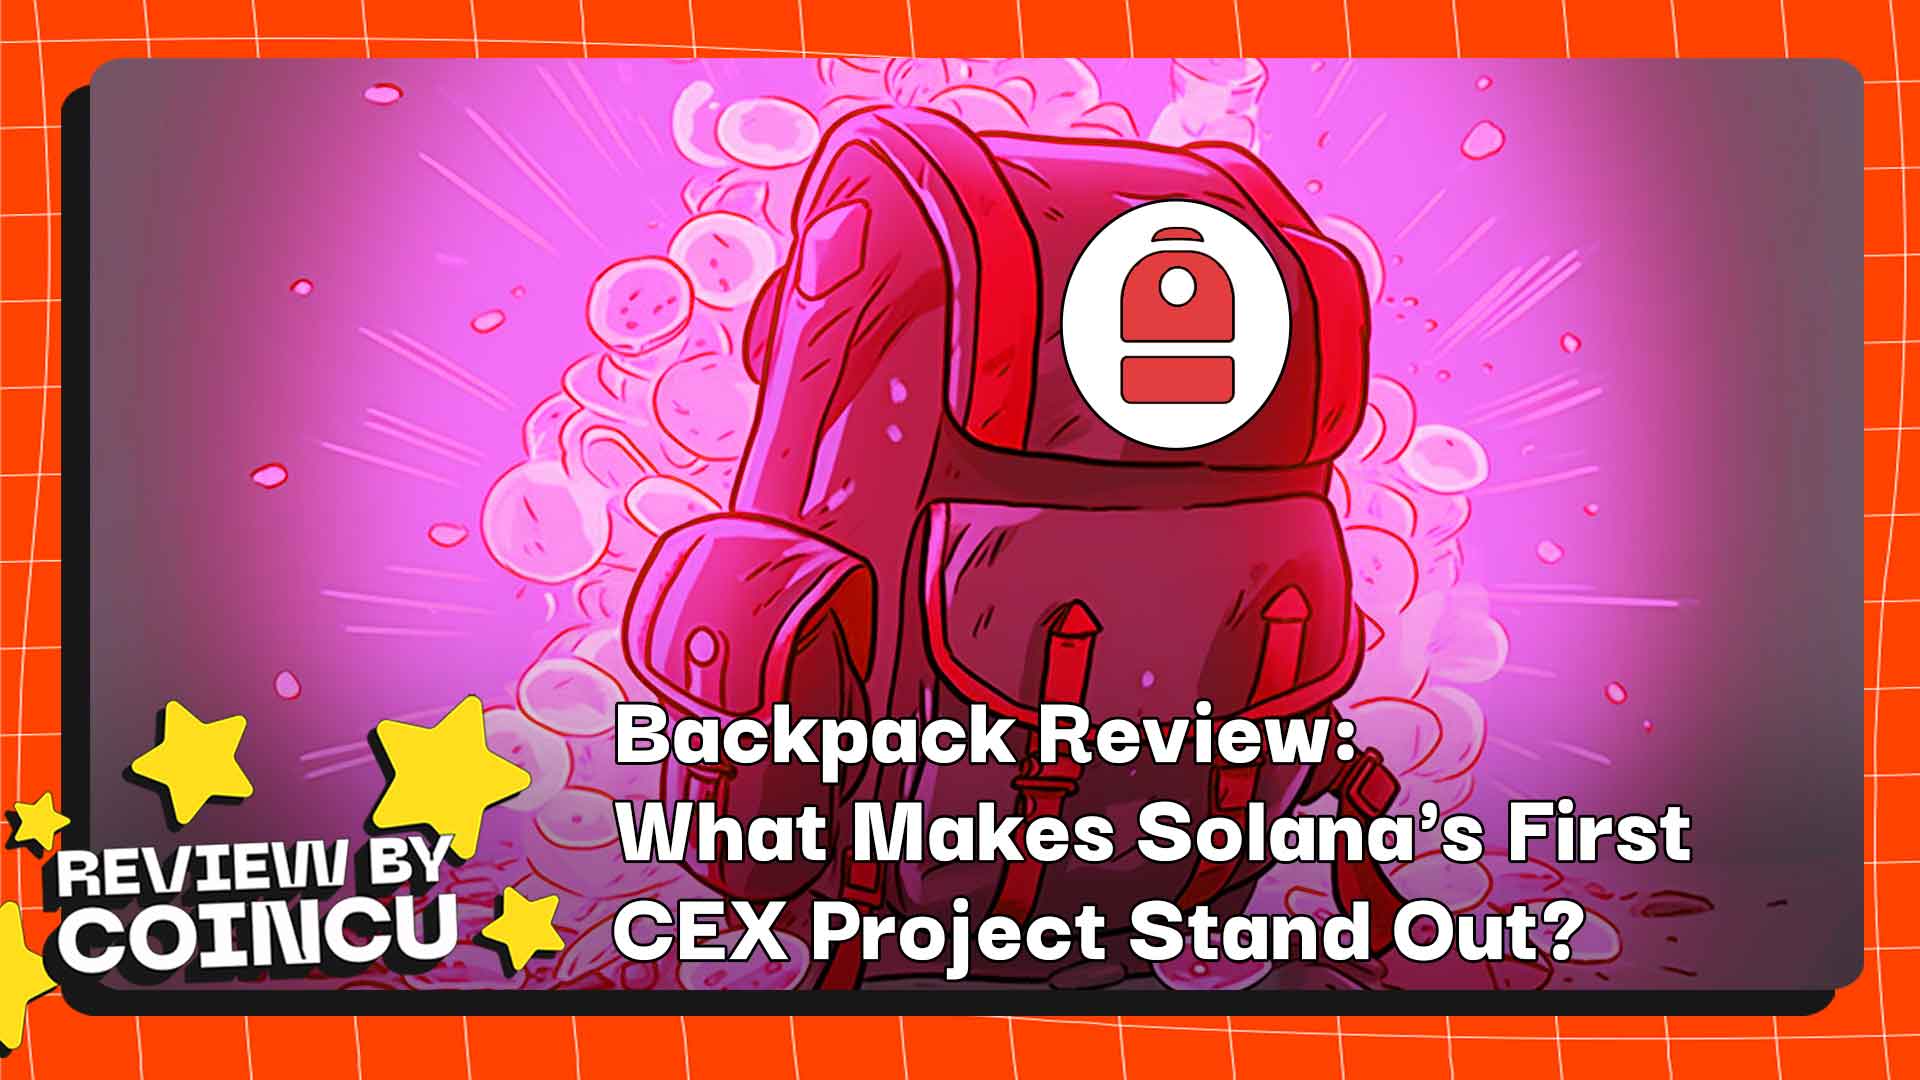 Backpack Review: What Makes Solana's First CEX Project Stand Out?